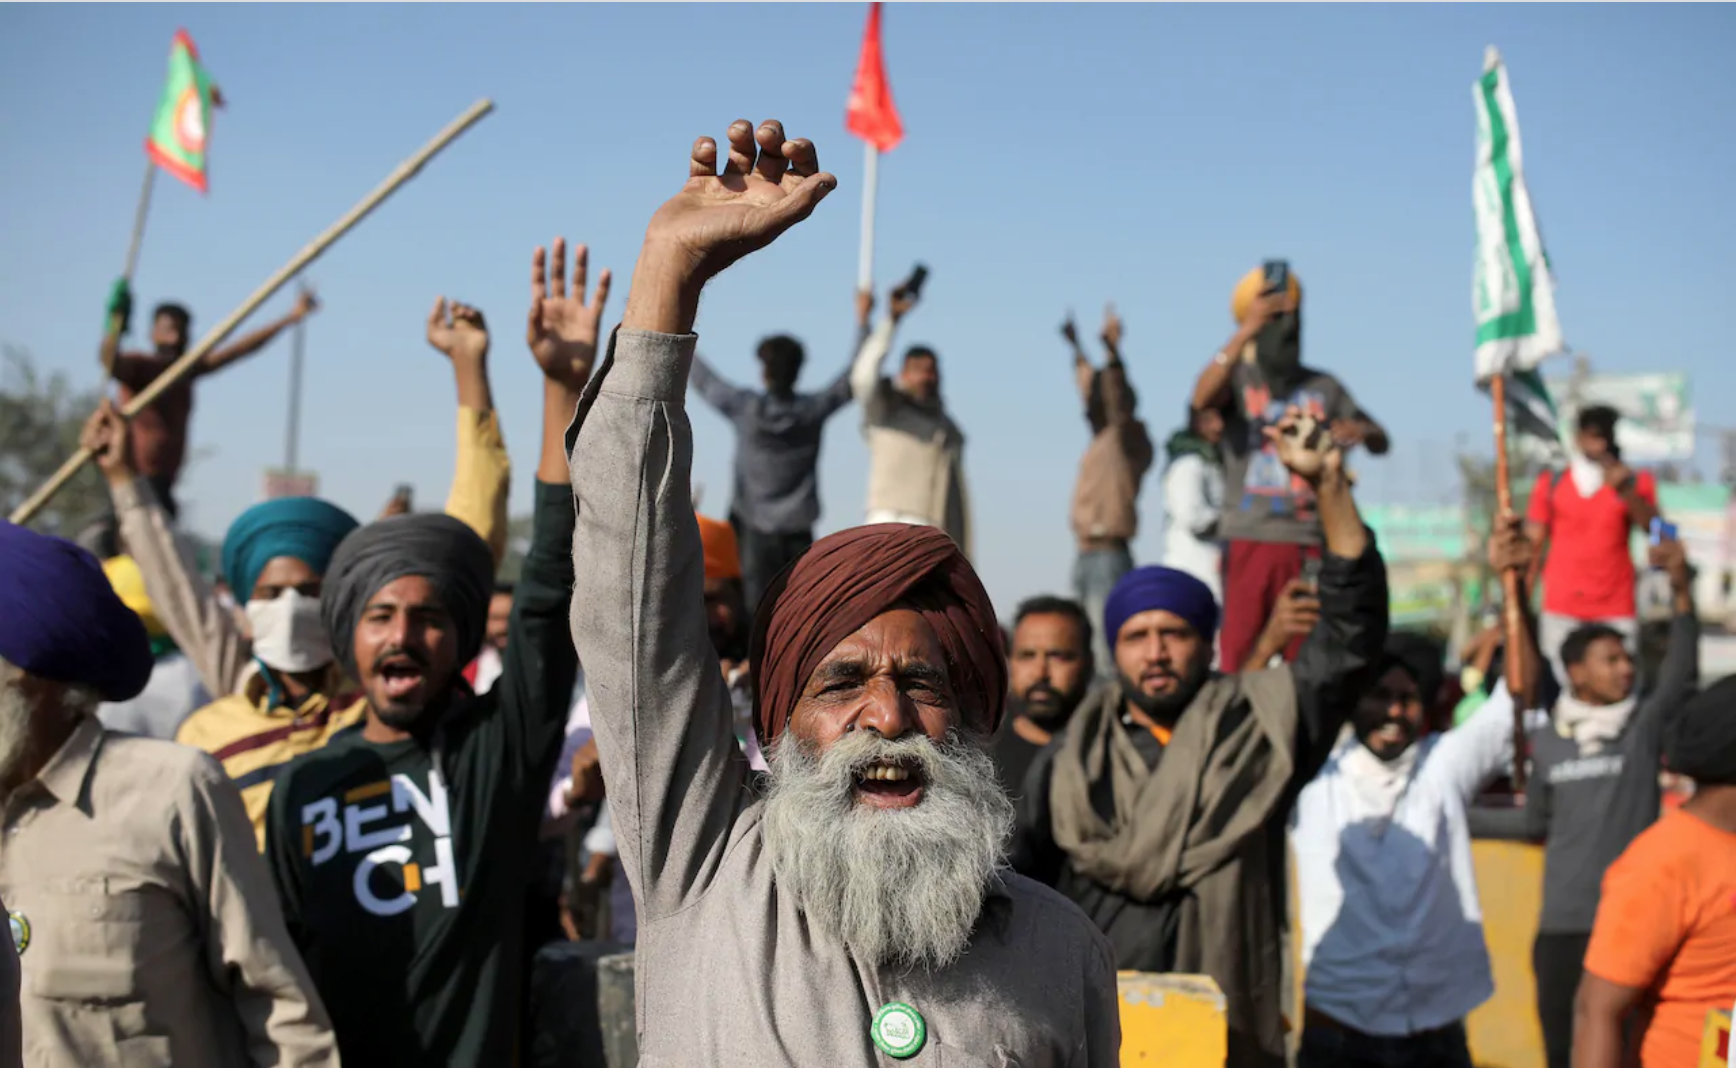 Protesters in India raise their fists.